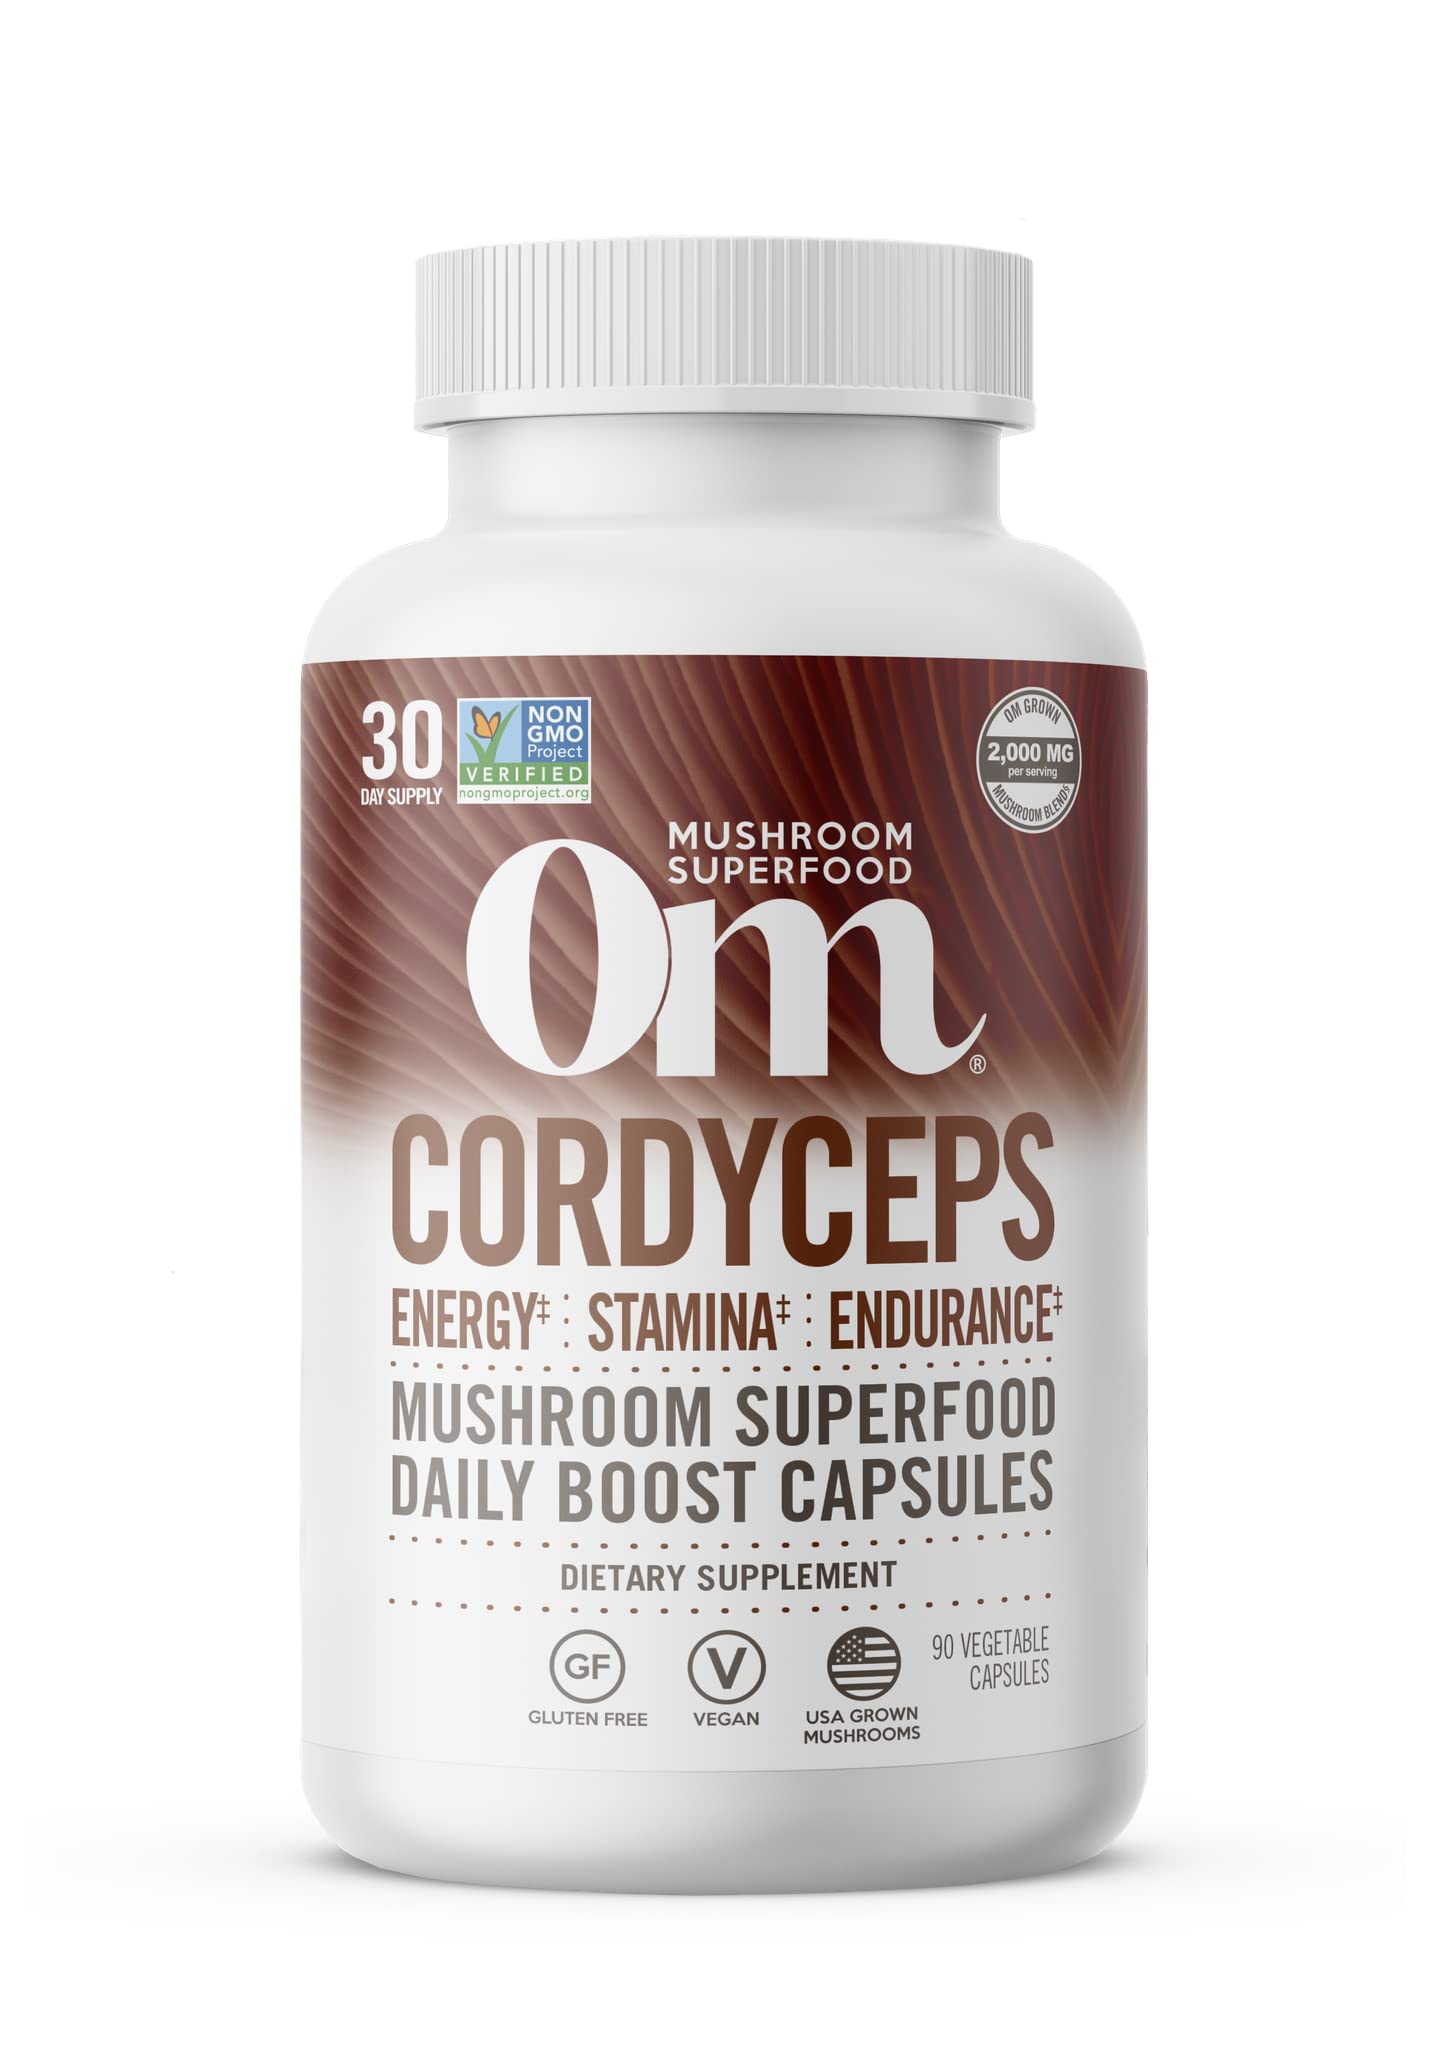 Om Mushroom Superfood Cordyceps Mushroom Capsules Superfood Supplement, 90 Count, 30 Days, Energy, Power, Stamina and Endurance Support, Superfood Supplement for Sports Performance